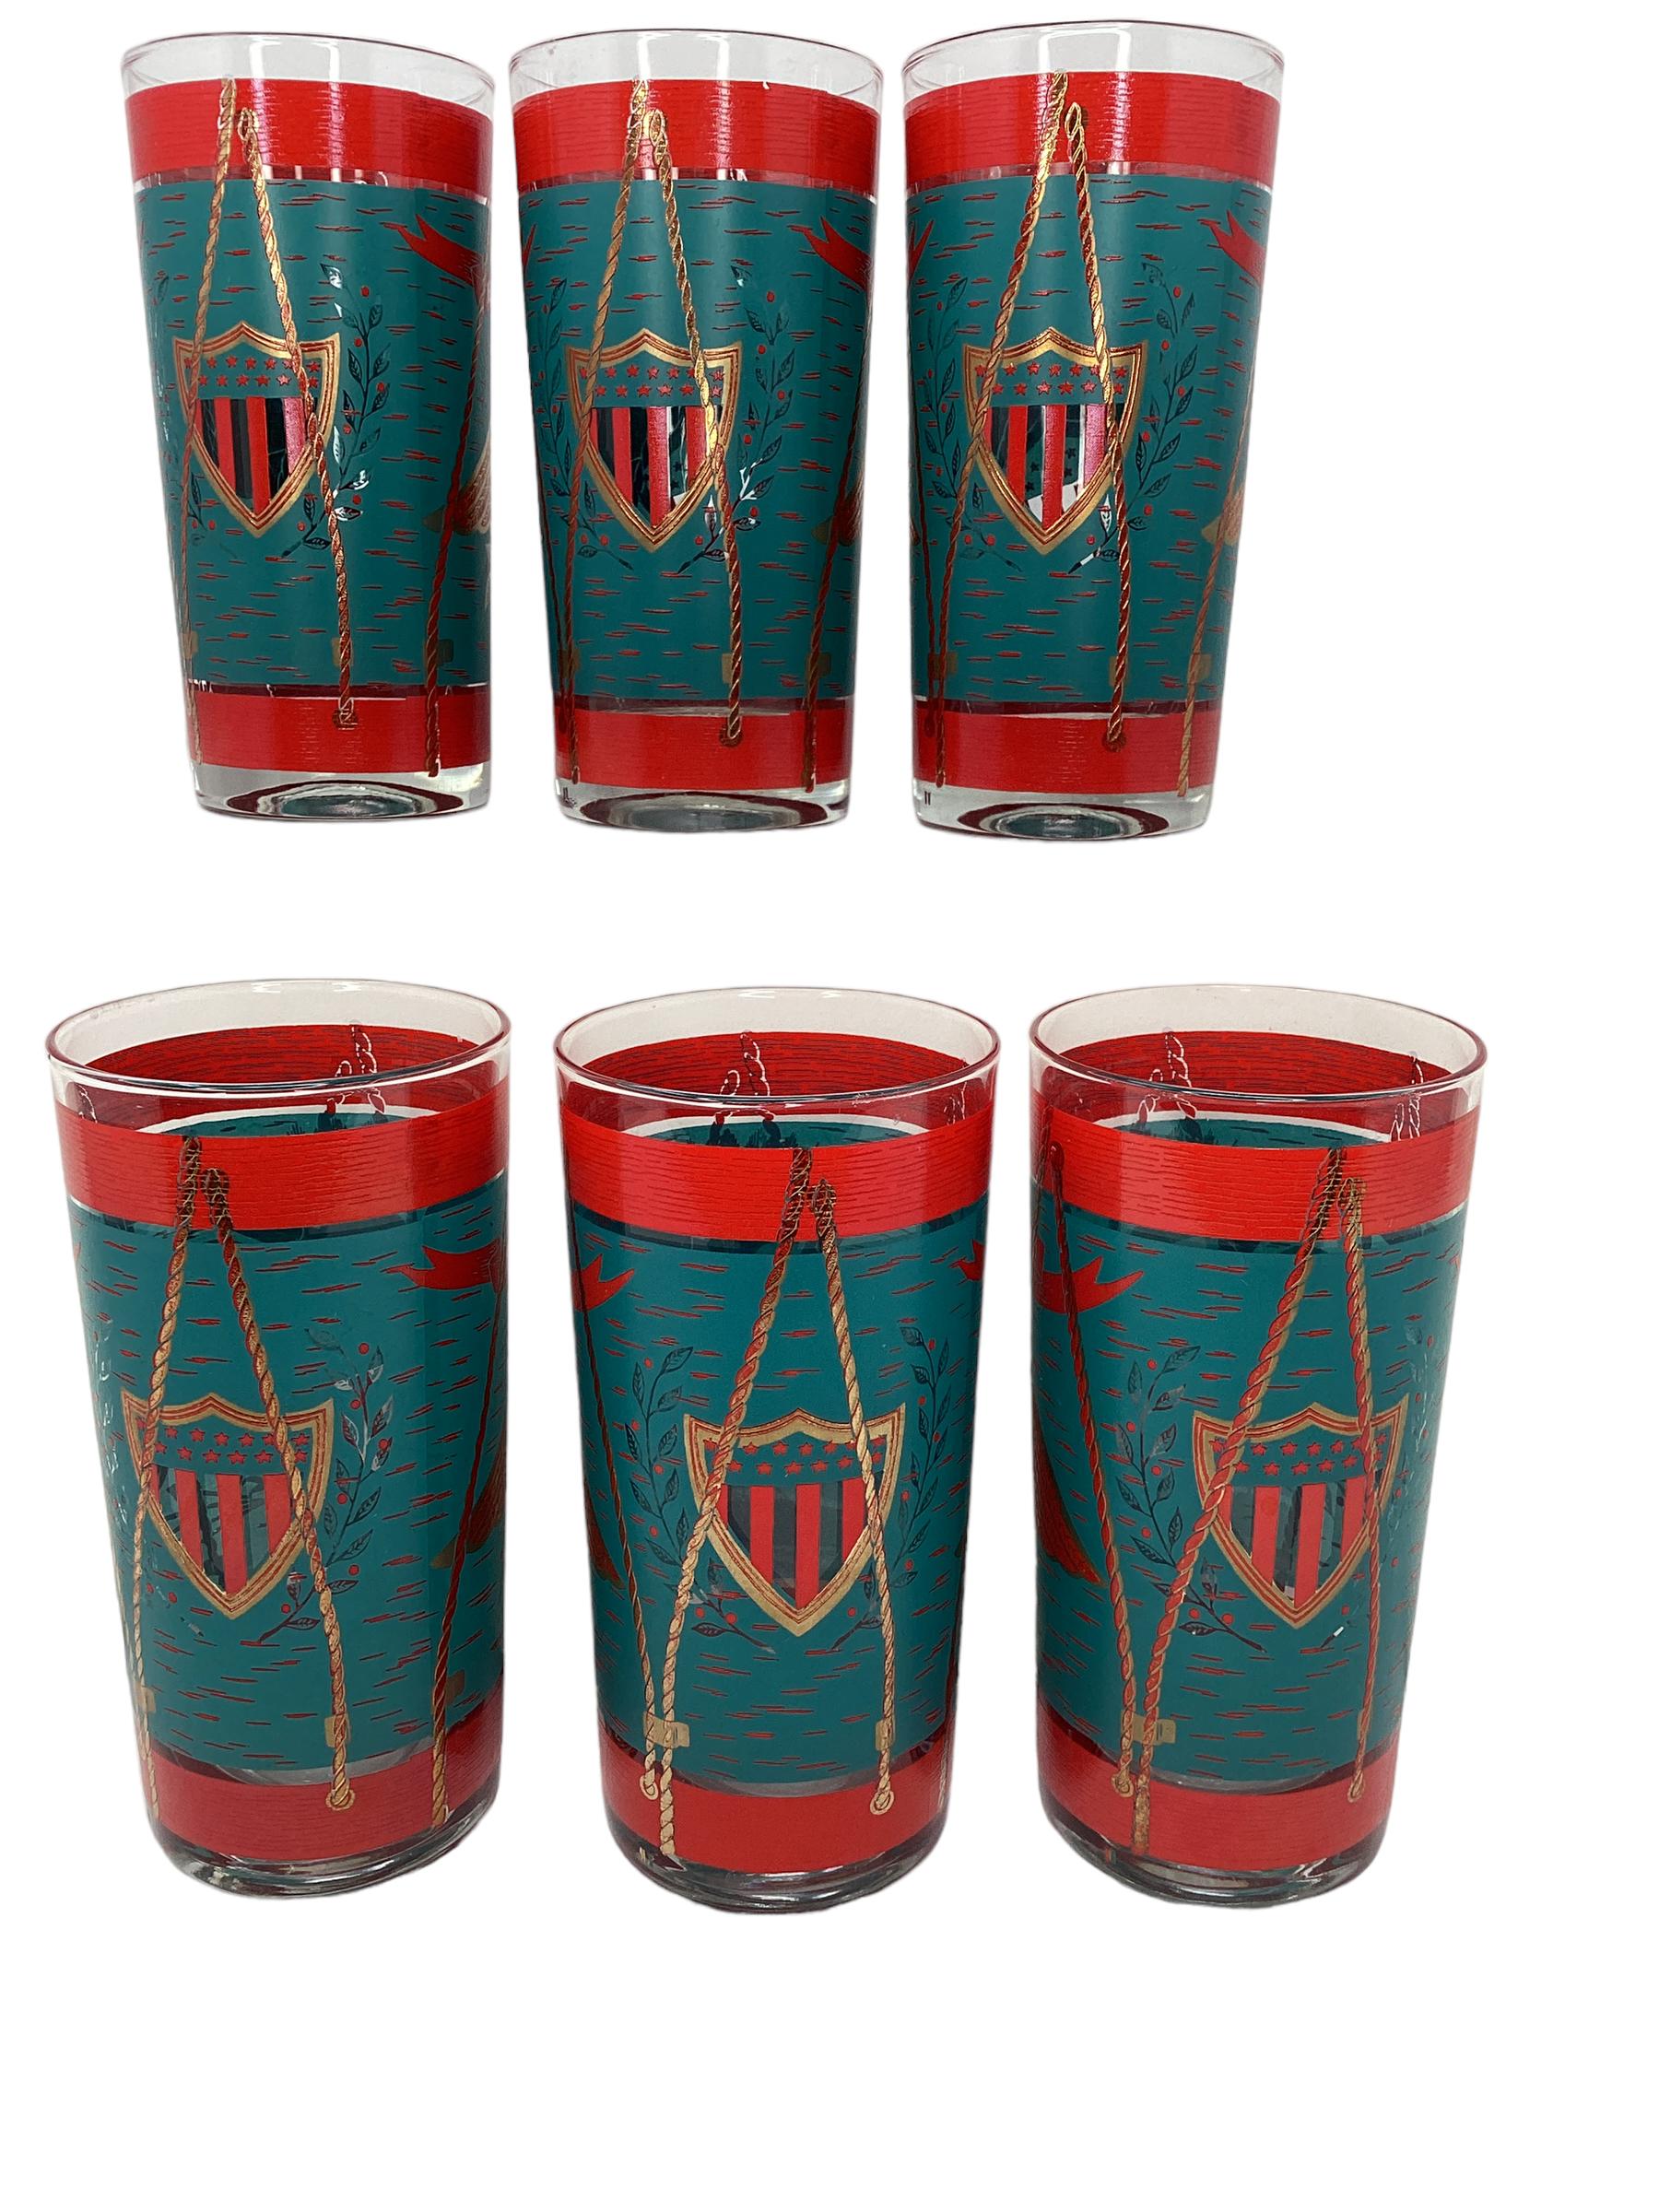 Set of 6 Vintage Cera Glassware Highball Glasses, Regimental Drum In Good Condition For Sale In Chapel Hill, NC